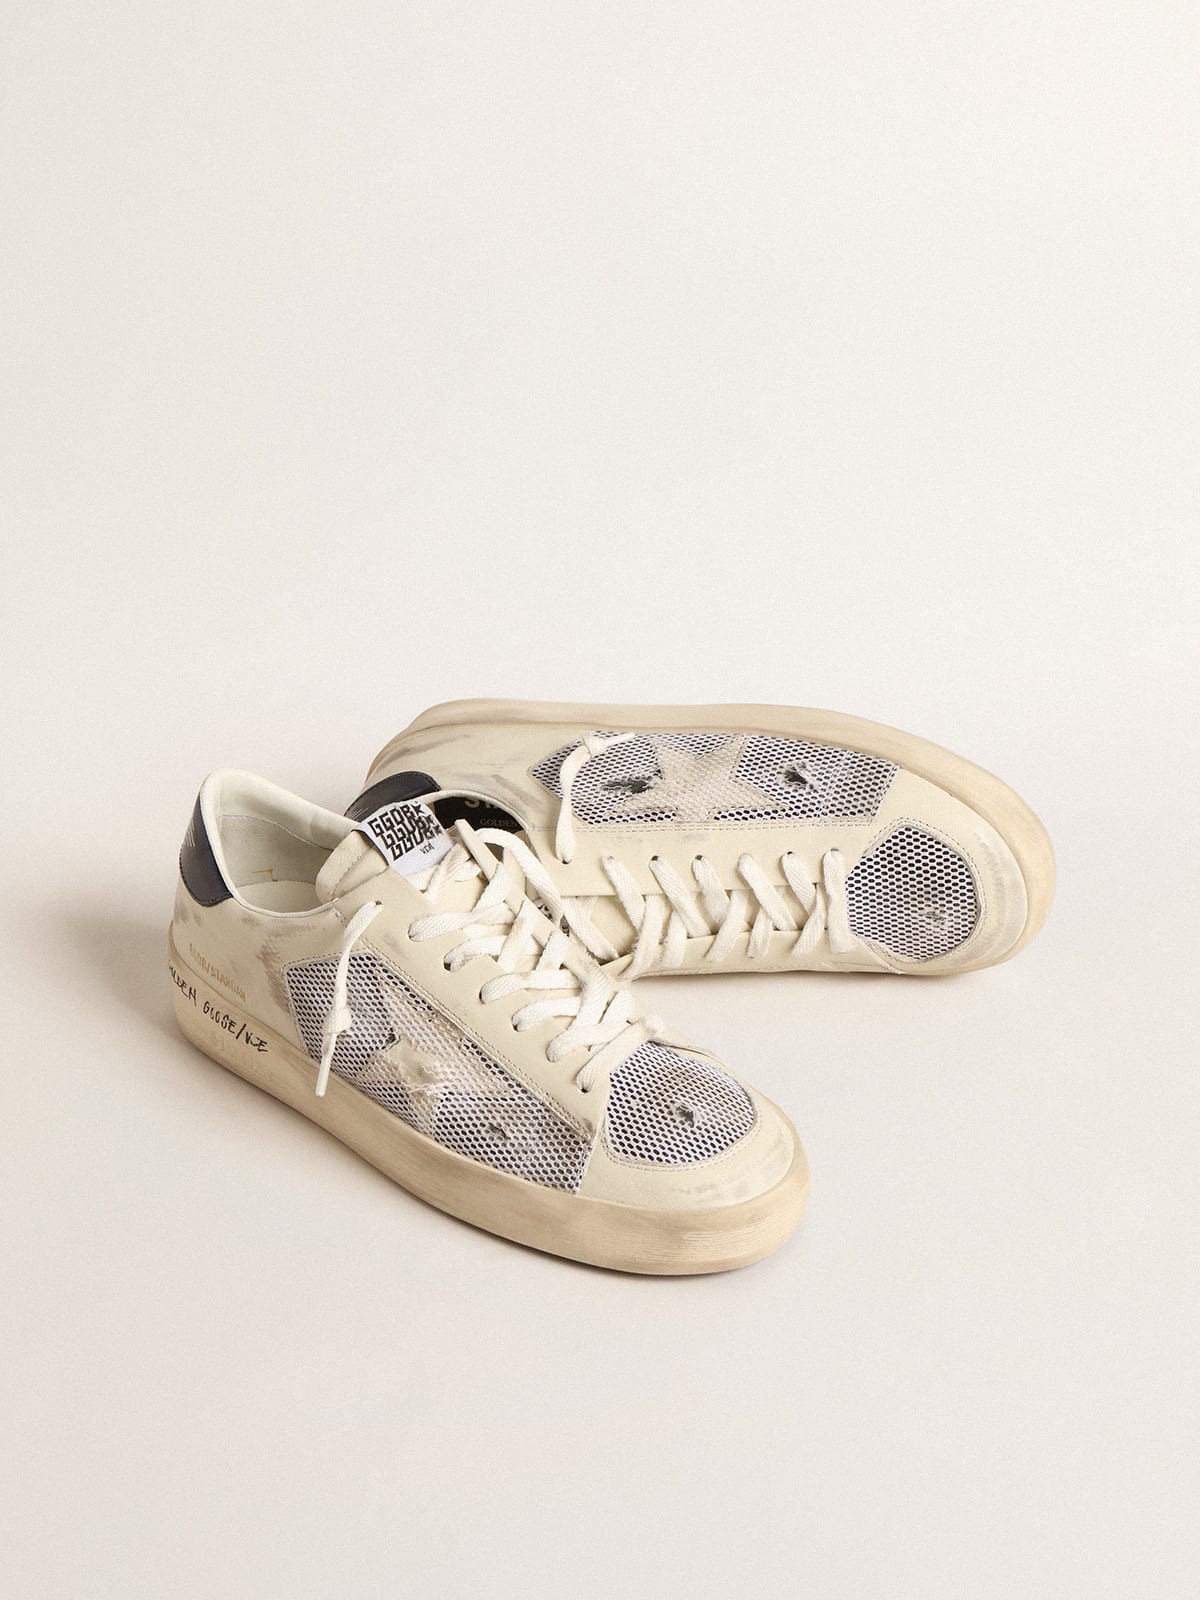 Golden Goose - Stardan in white leather and mesh with blue metallic heel tab in 